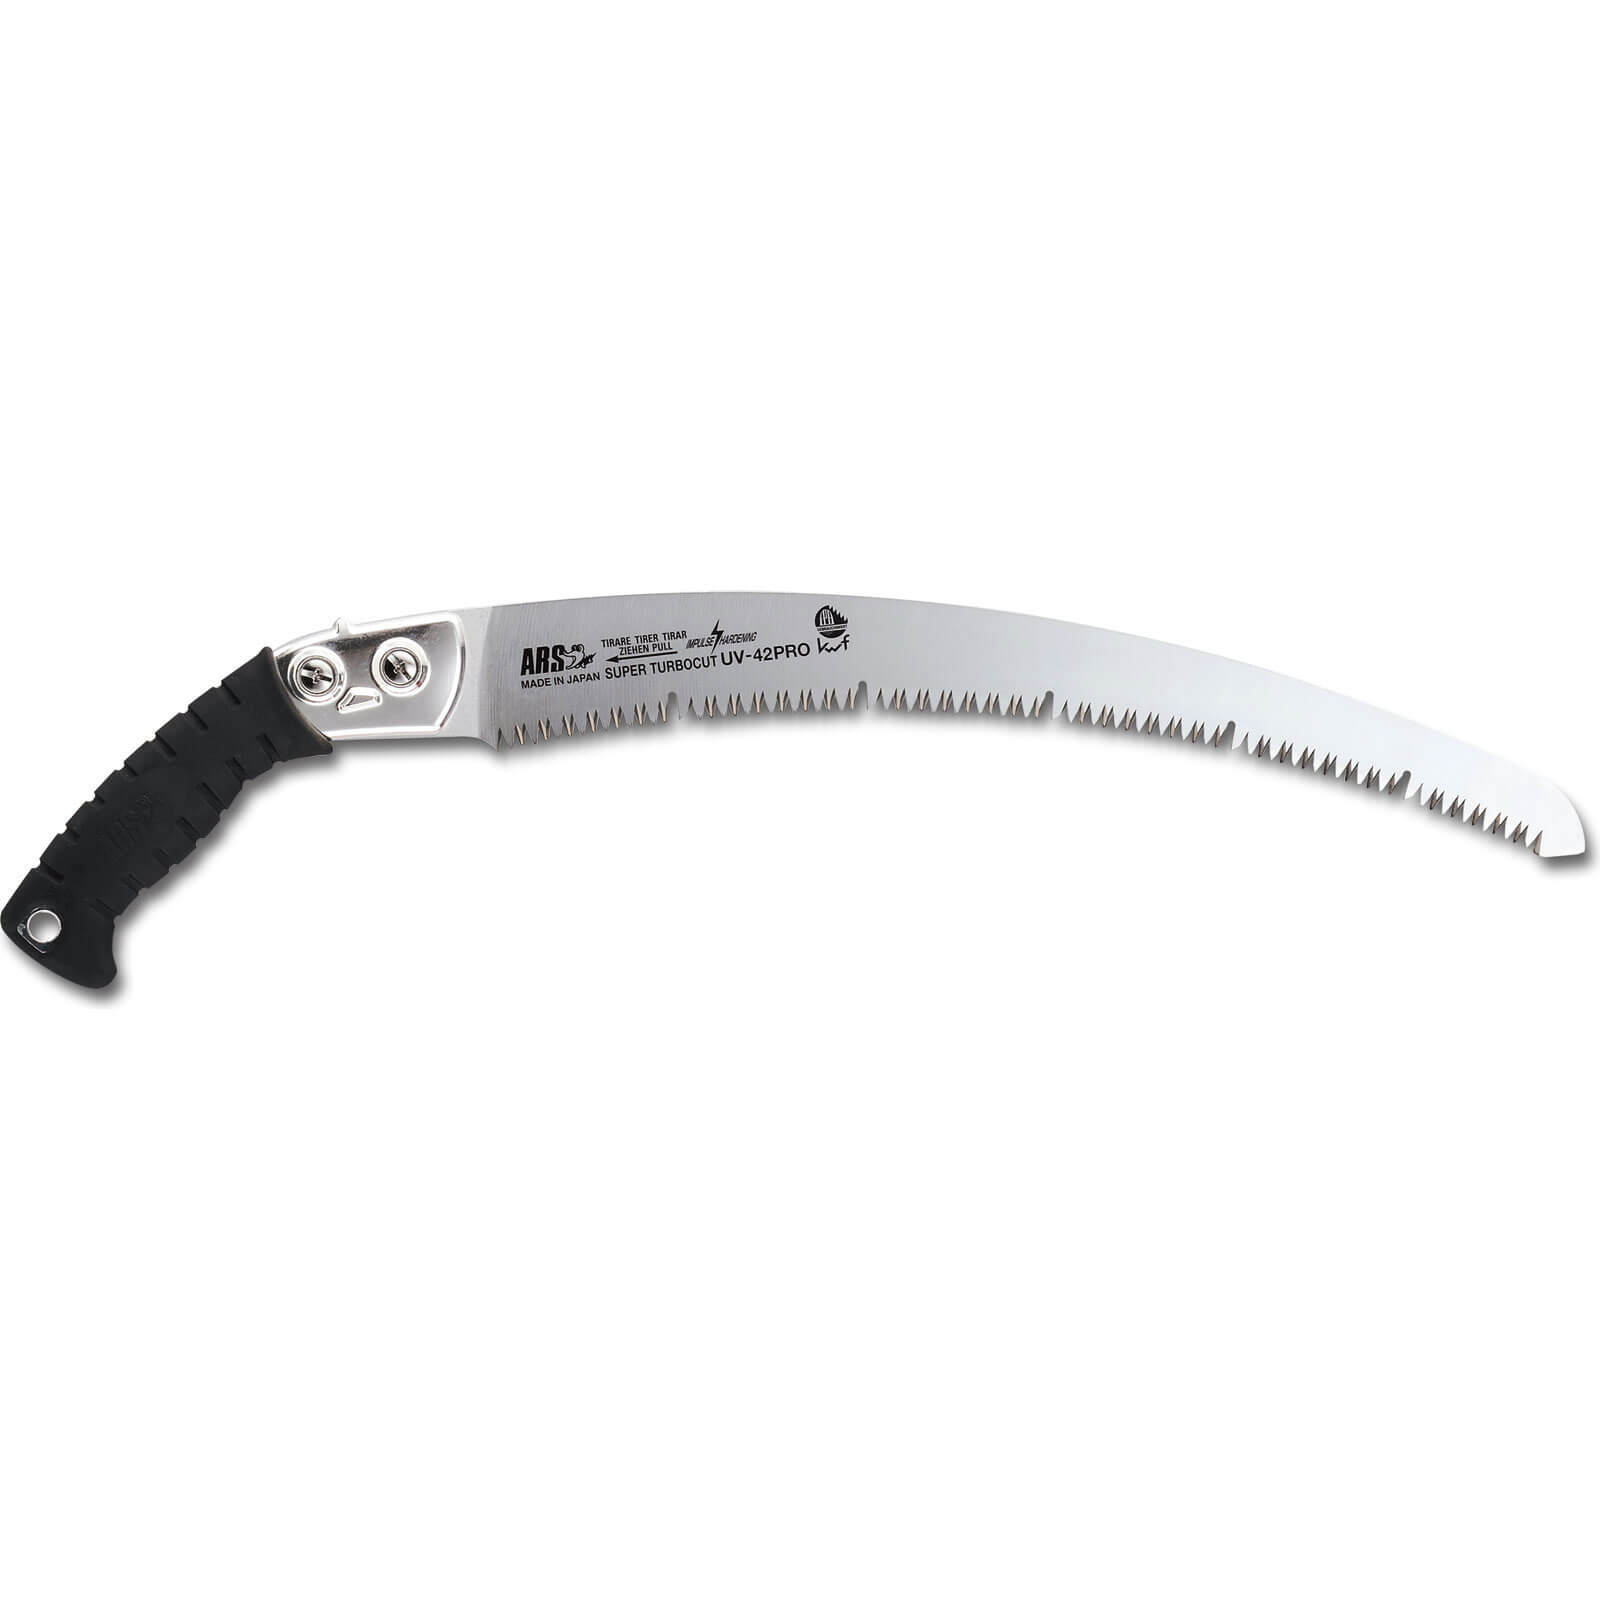 ARS UV-42PRO Pruning Saw with Rubber Grip Handle, Sheath & 420mm Super Turbocut Curved Blade Overall 600mm Long